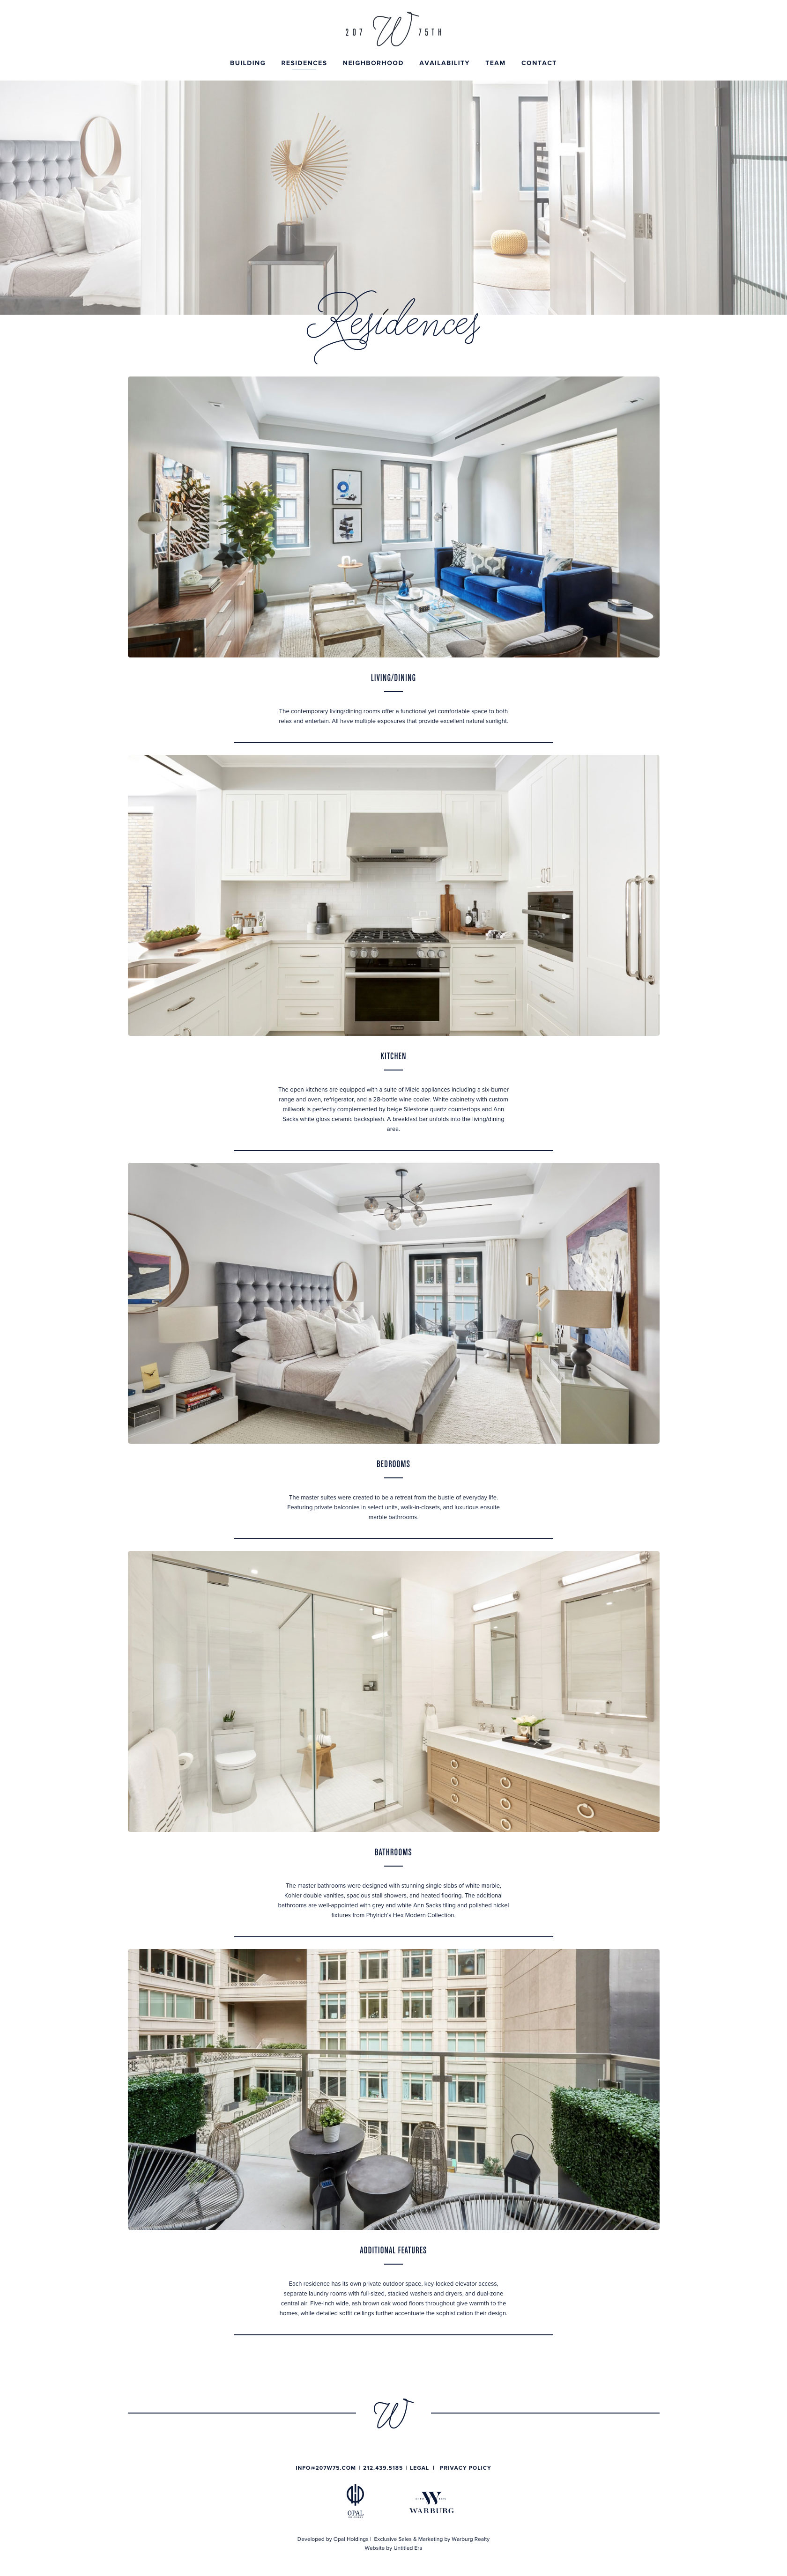 Desktop layout of 207 West 75th Street’s residences page